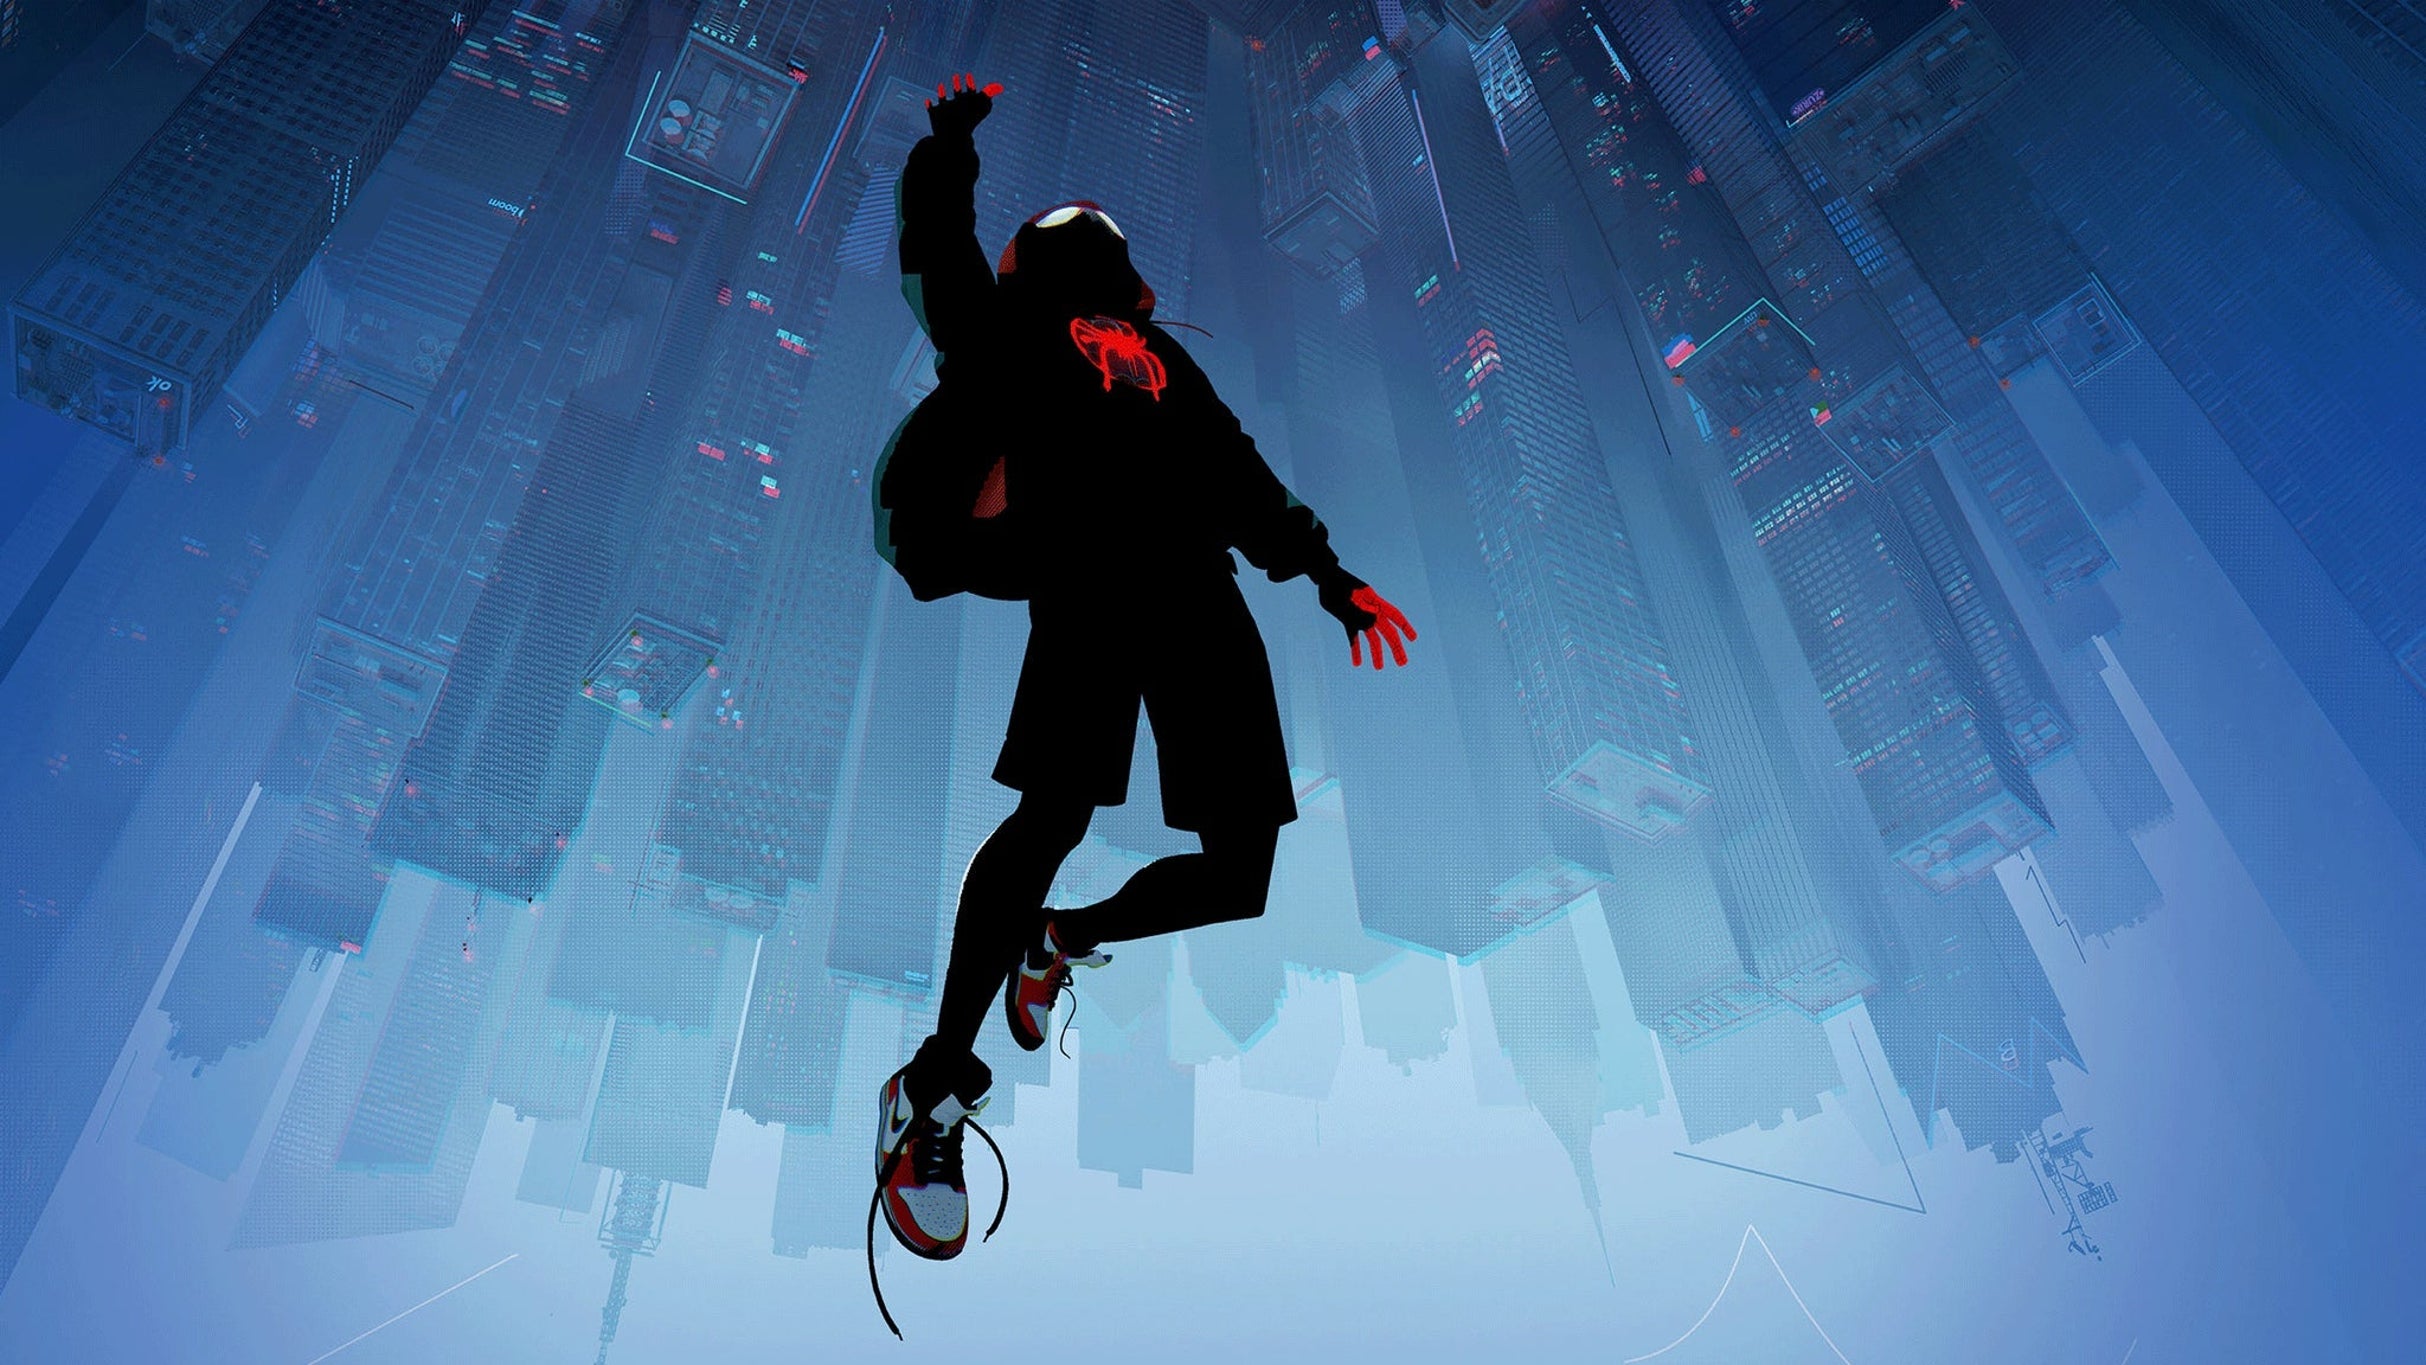 Spider-Man: Into the Spider-Verse Live In Concert  free pre-sale password